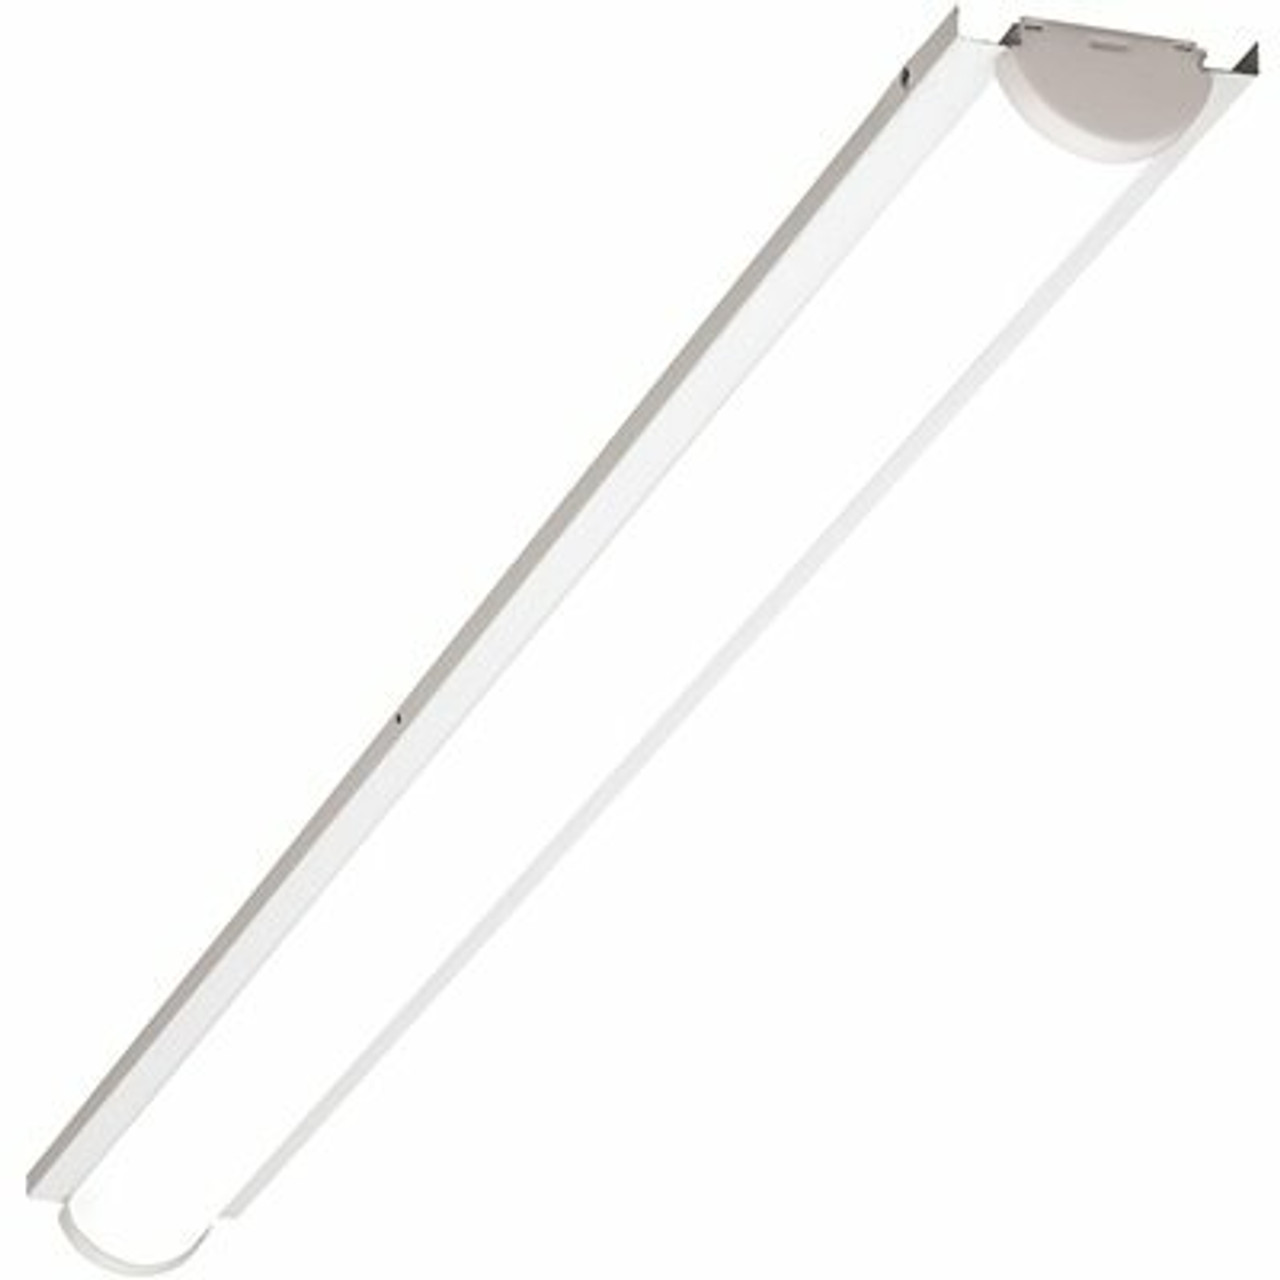 Lsrk 8 Ft. 128-Watt Equivalent Integrated Led White Retrofit Kit For Linear Strip, 40K, Frosted Acrylic Lens Included - 306701731